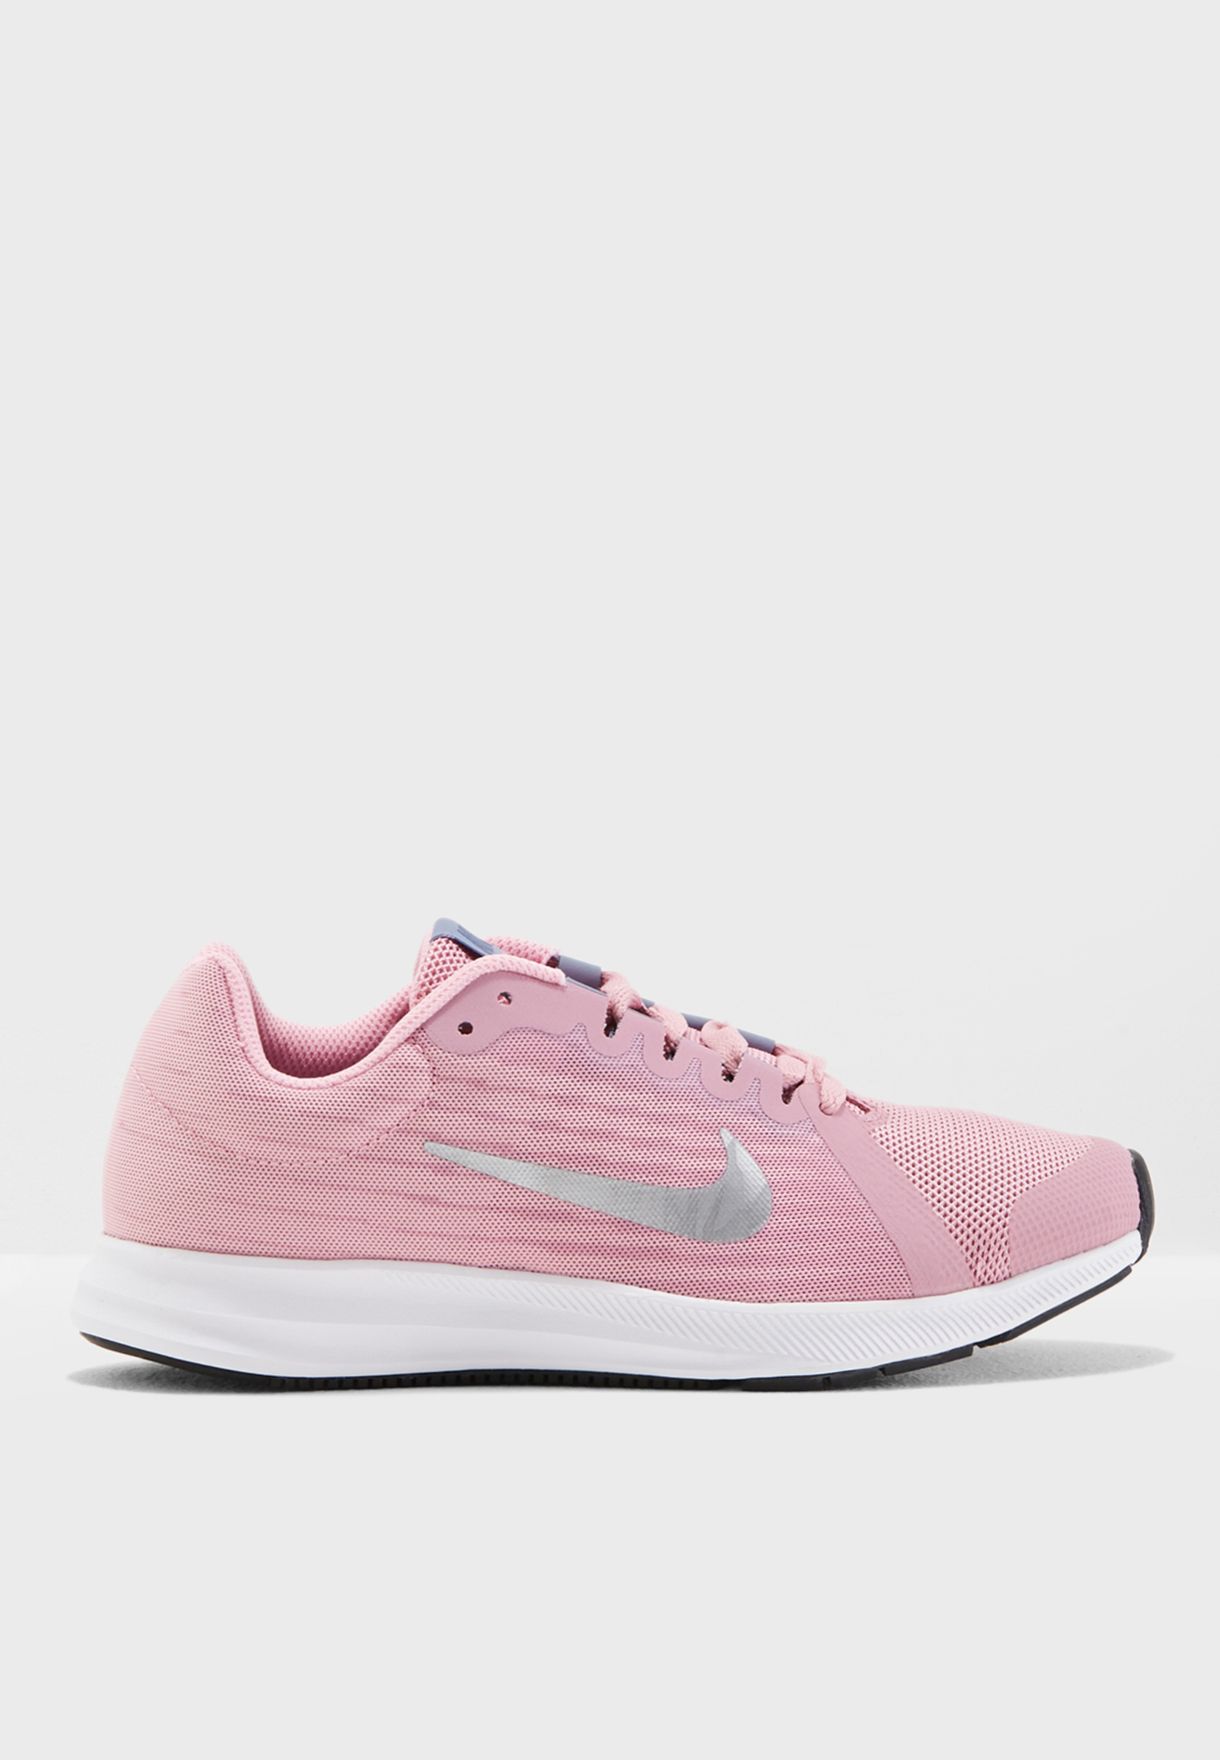 nike youth downshifter 8